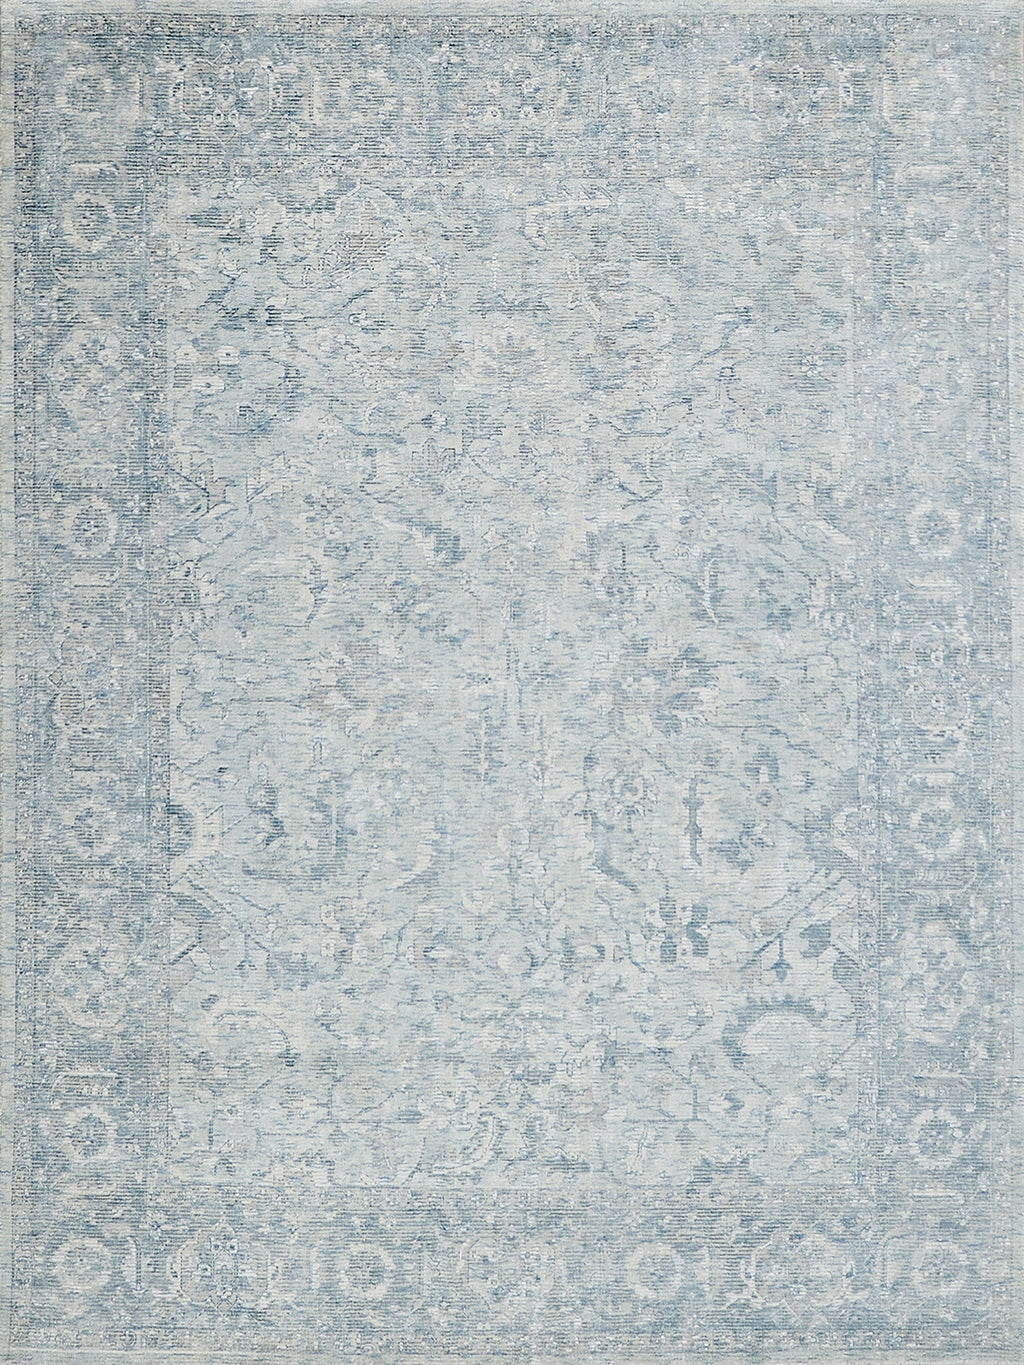 Exquisite Rugs Tuscany 6341 Ivory/Blue Area Rug